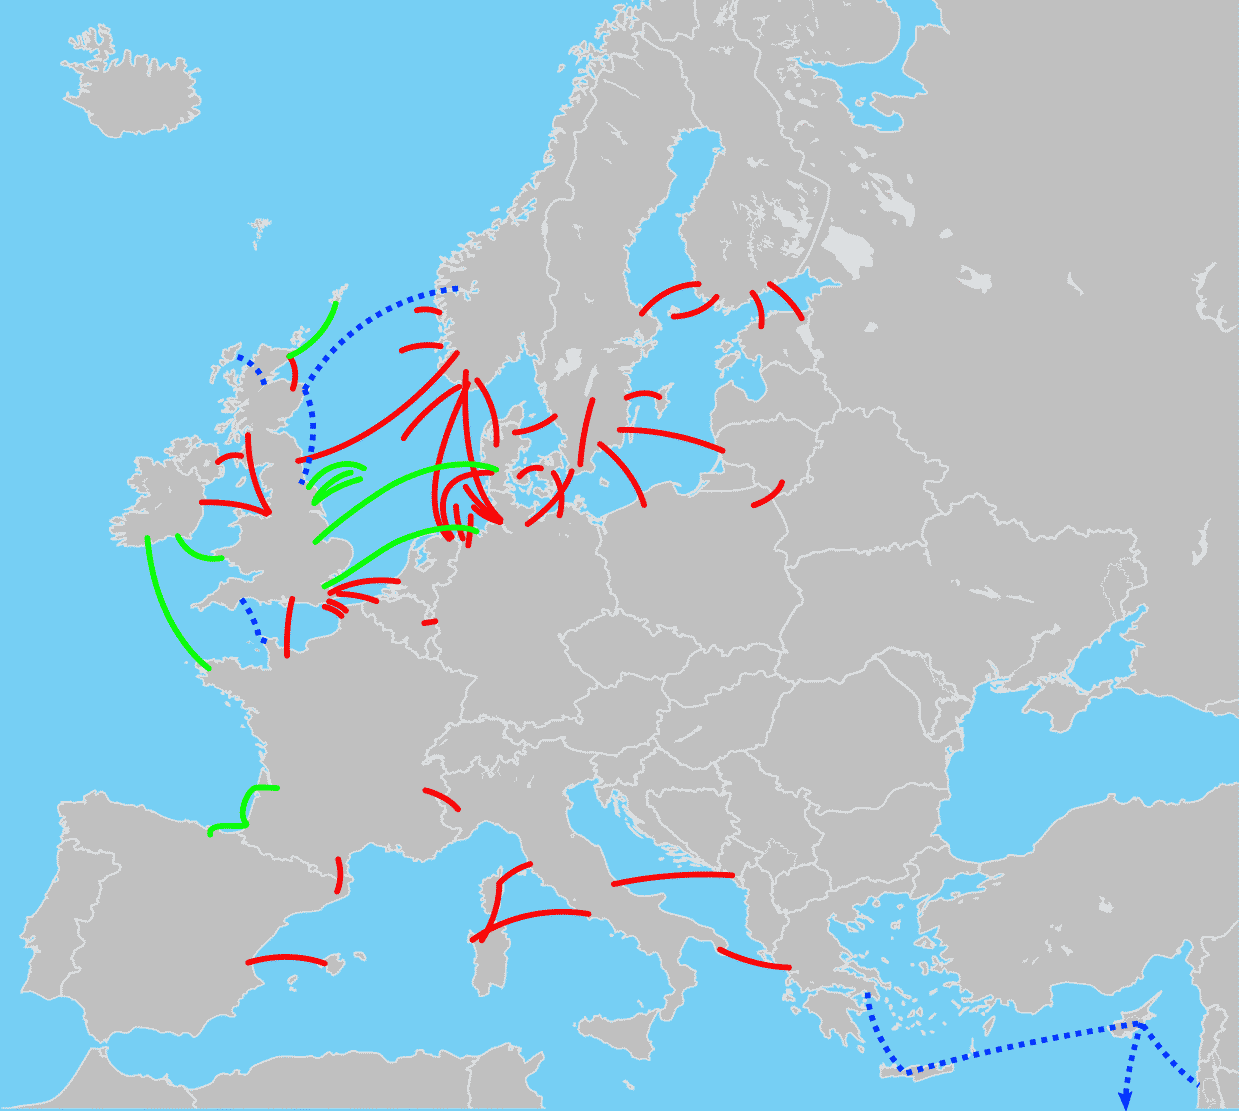 HVDC_Europe made by J.J.Messerly and those stated in source. - Blank map of Europe.svg by Maix, which is based on Europe countries.svg by Tintazul